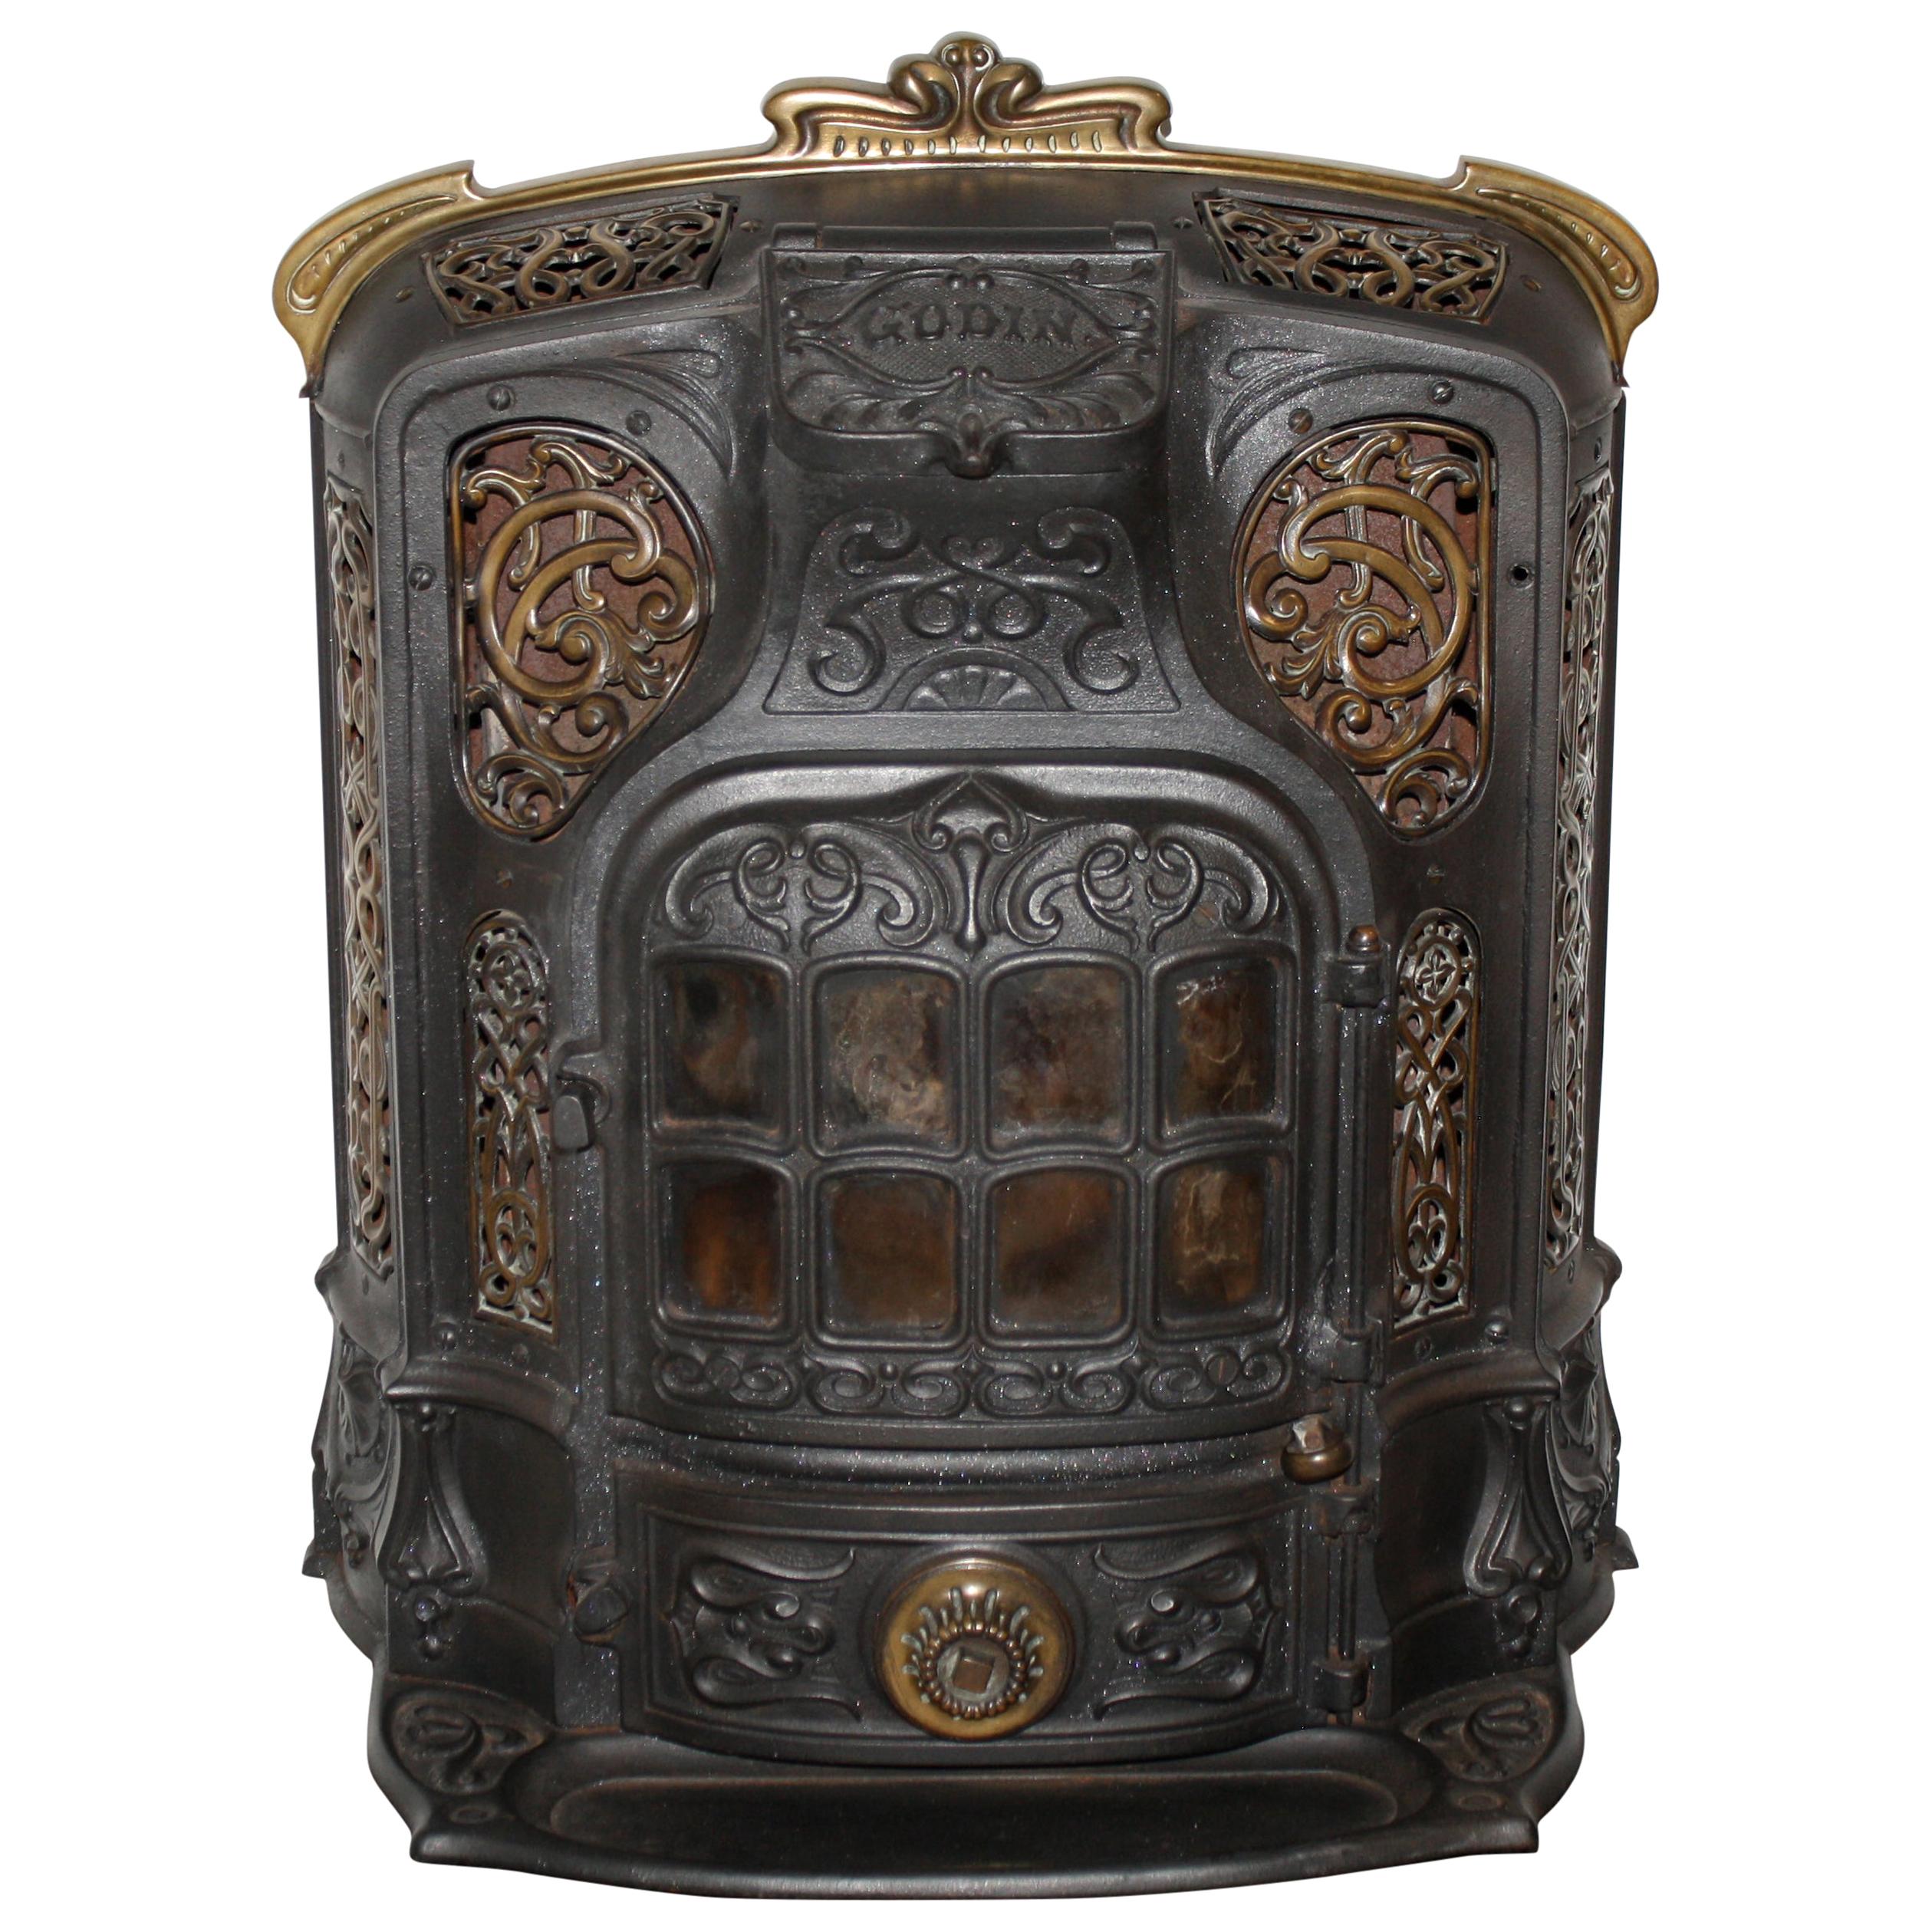 French Cast Iron Stove with Brass Accents by Godin, circa 1910